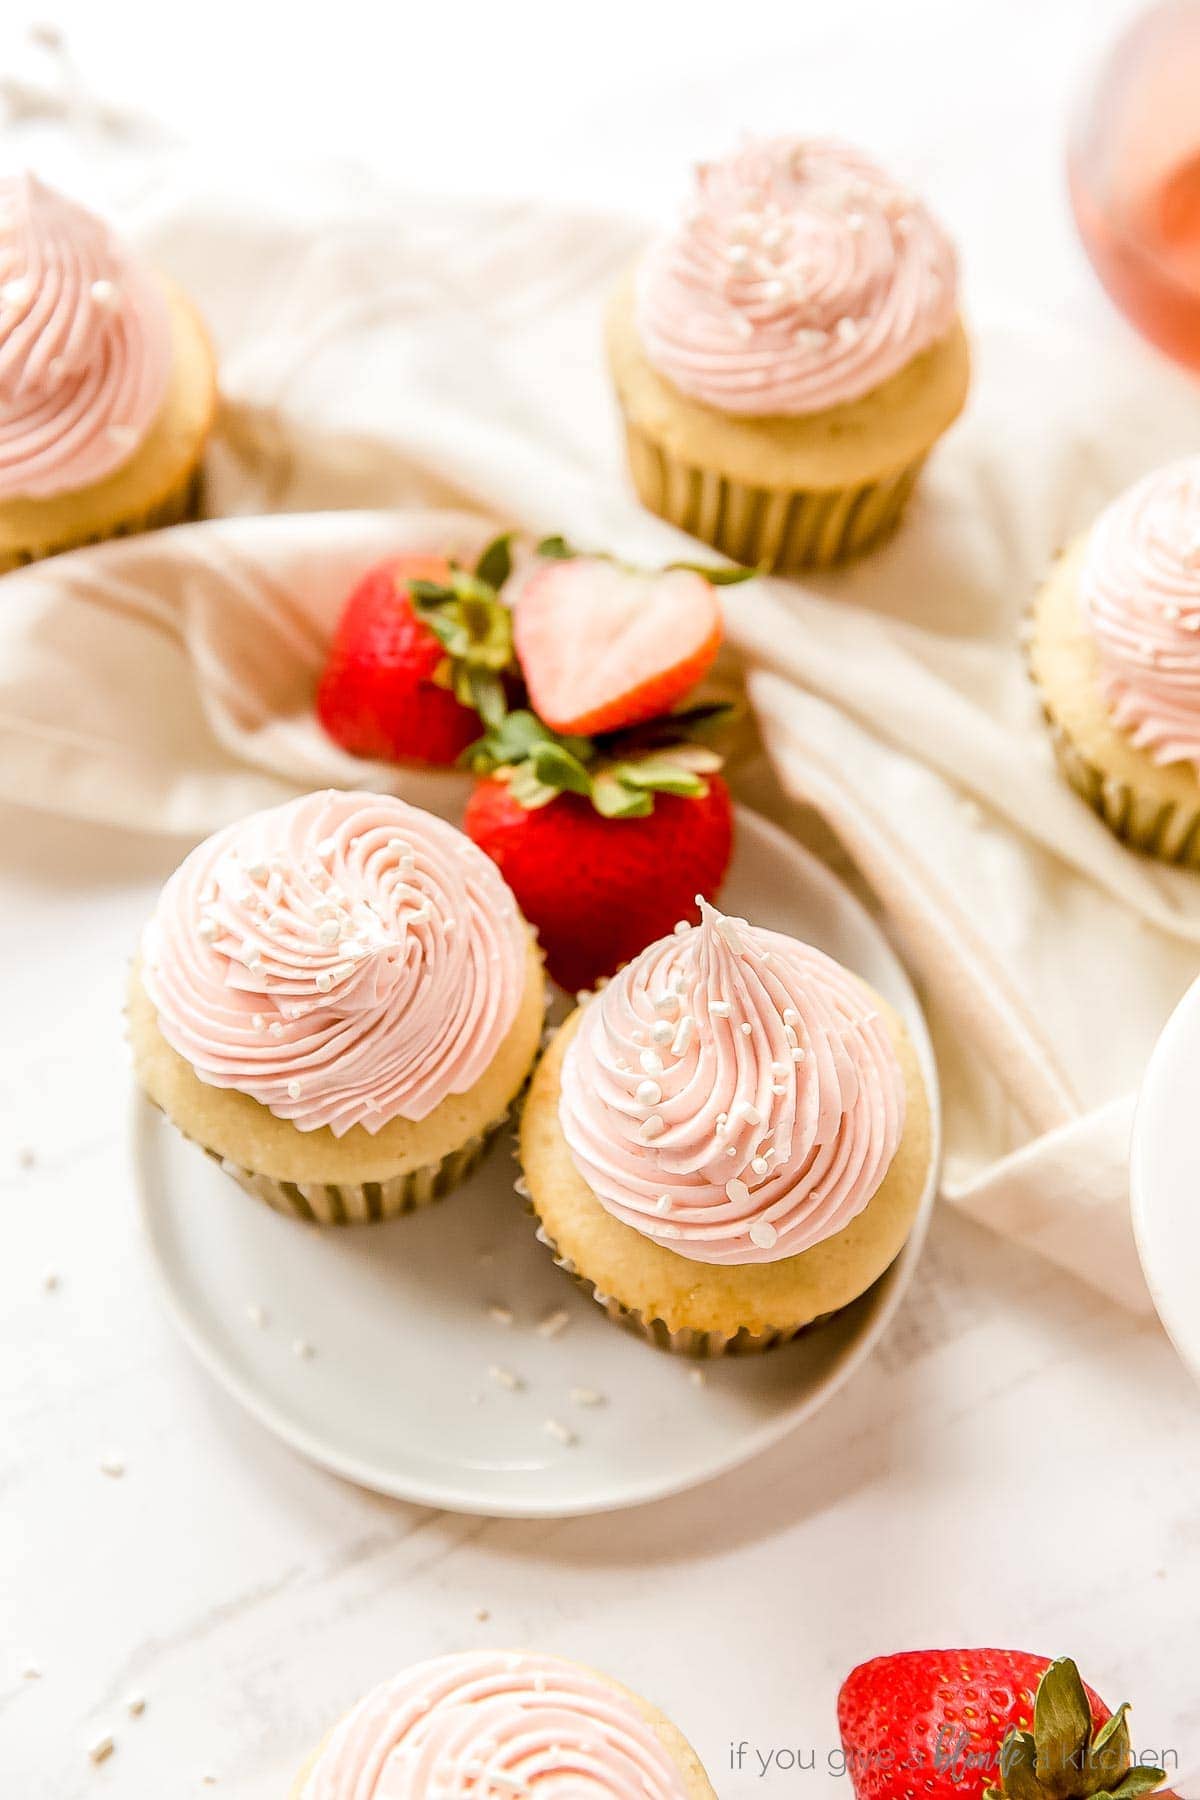 strawberry moscato cupcakes recipe pretty cupcakes with pink frosting and nonpareils sprinkles